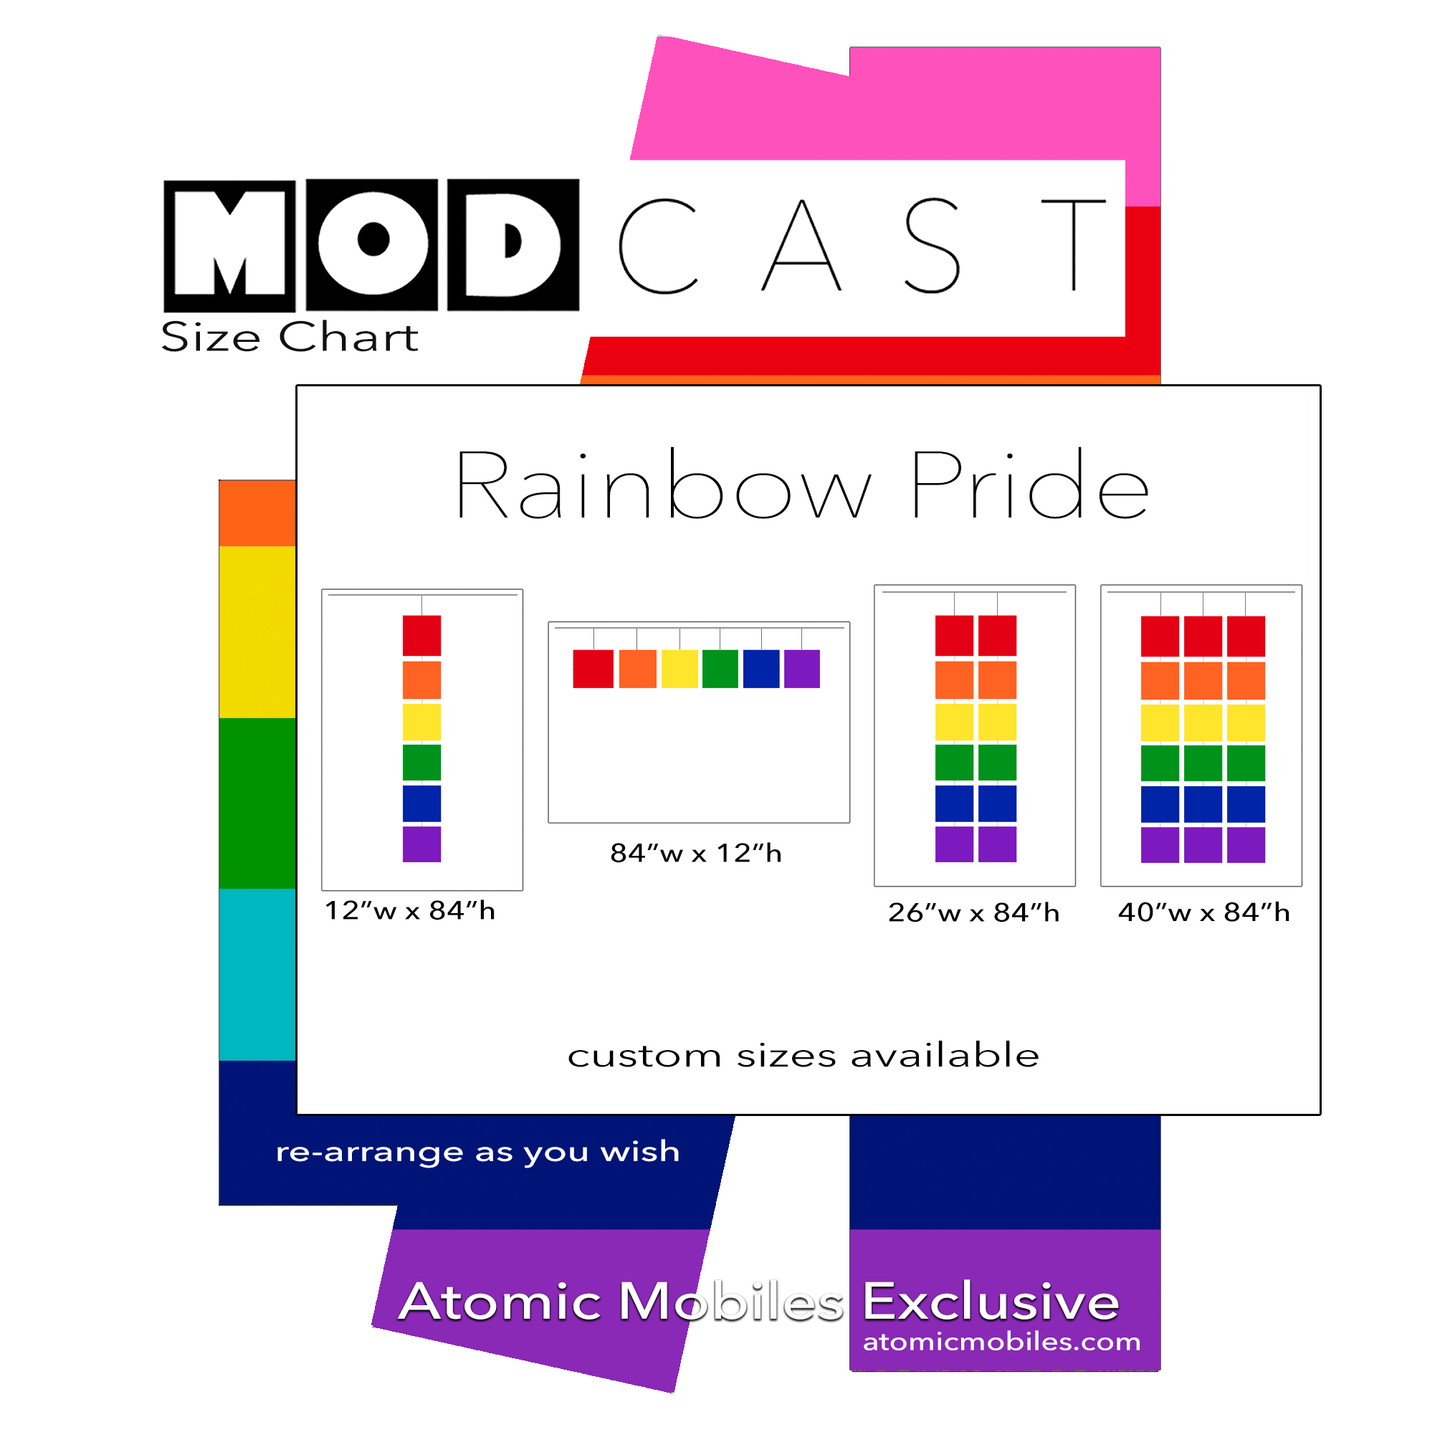 Size Chart for MODcast Mobiles in LGBTQ+ Rainbow Colors - mid century modern abstract art for home decor - handmade in Los Angeles by AtomicMobiles.com